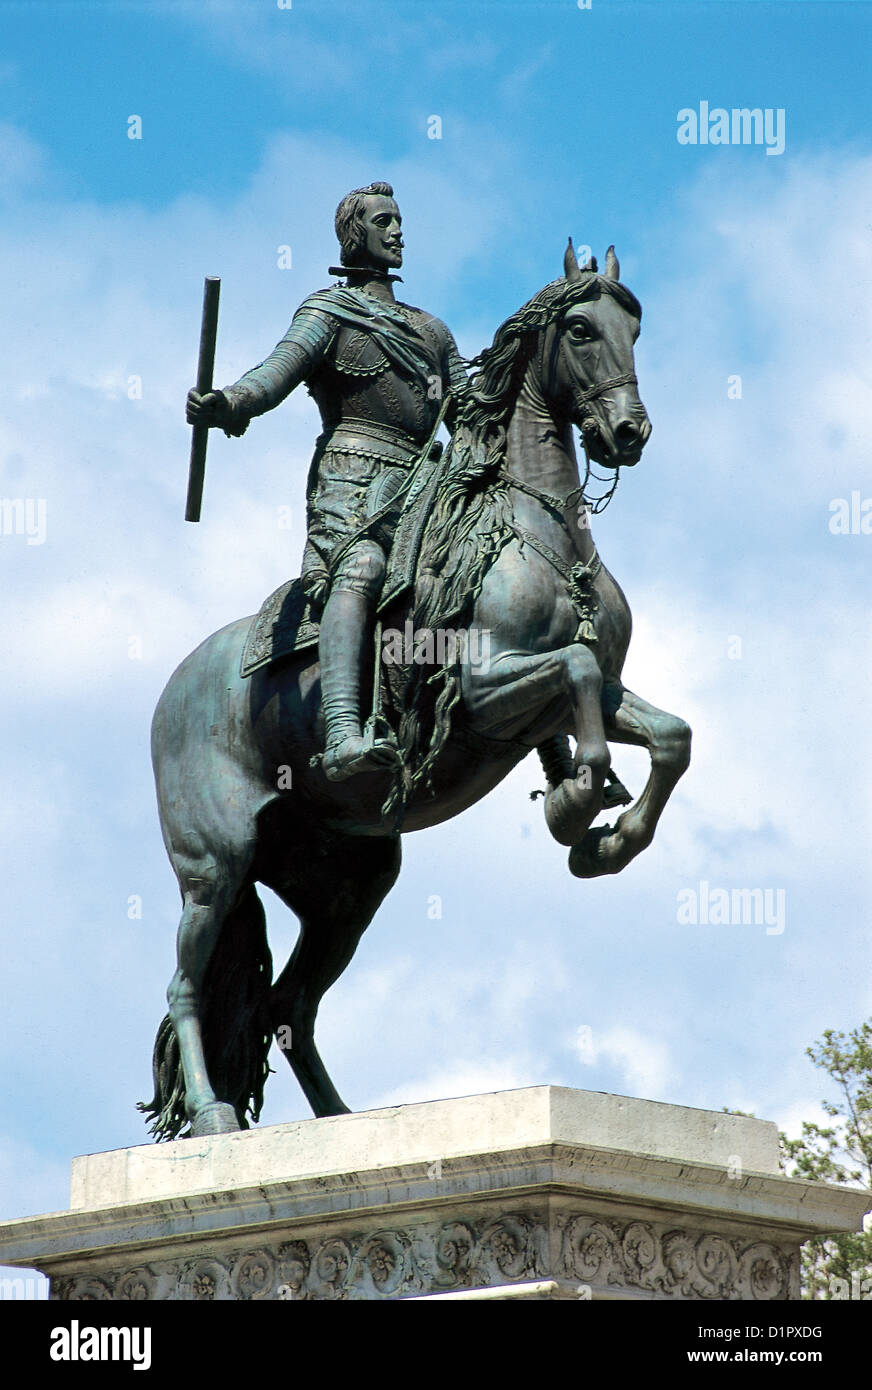 Philip IV of Spain (1605-1665). King of Spain and Portugal. Monument. Equestrian statue by Pietro Tacca. Madrid. Spain. Stock Photo